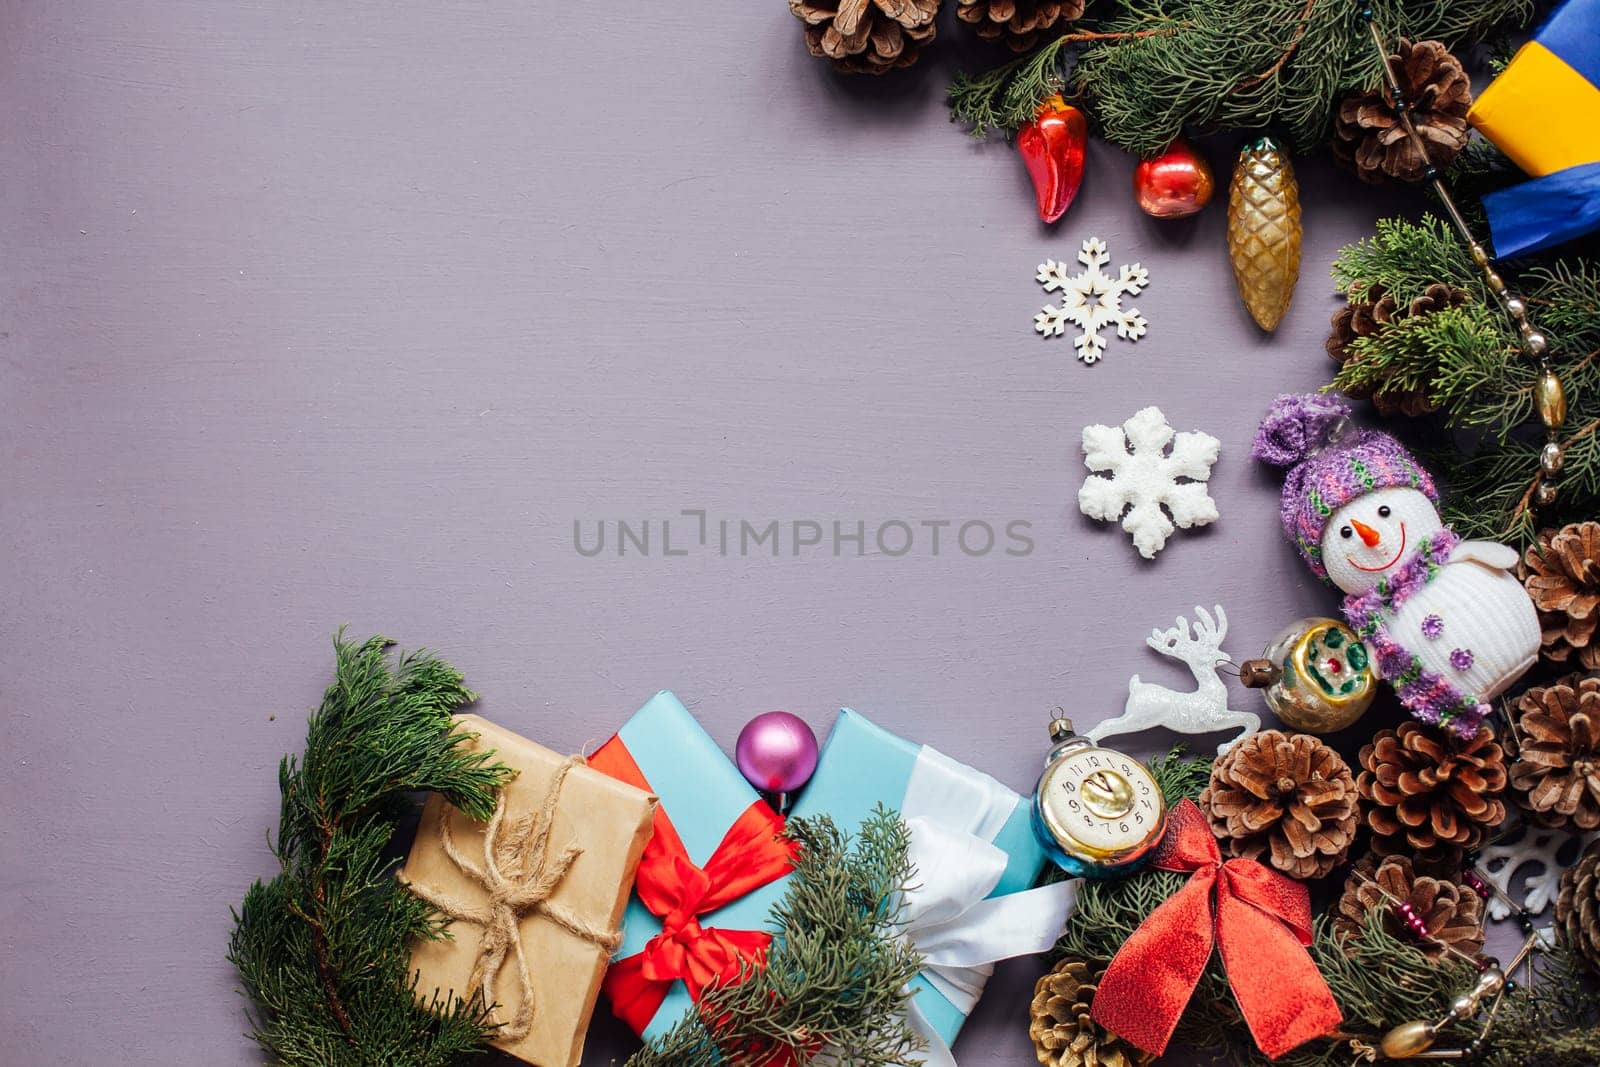 Christmas card gifts decor for the new year on a purple background by Simakov